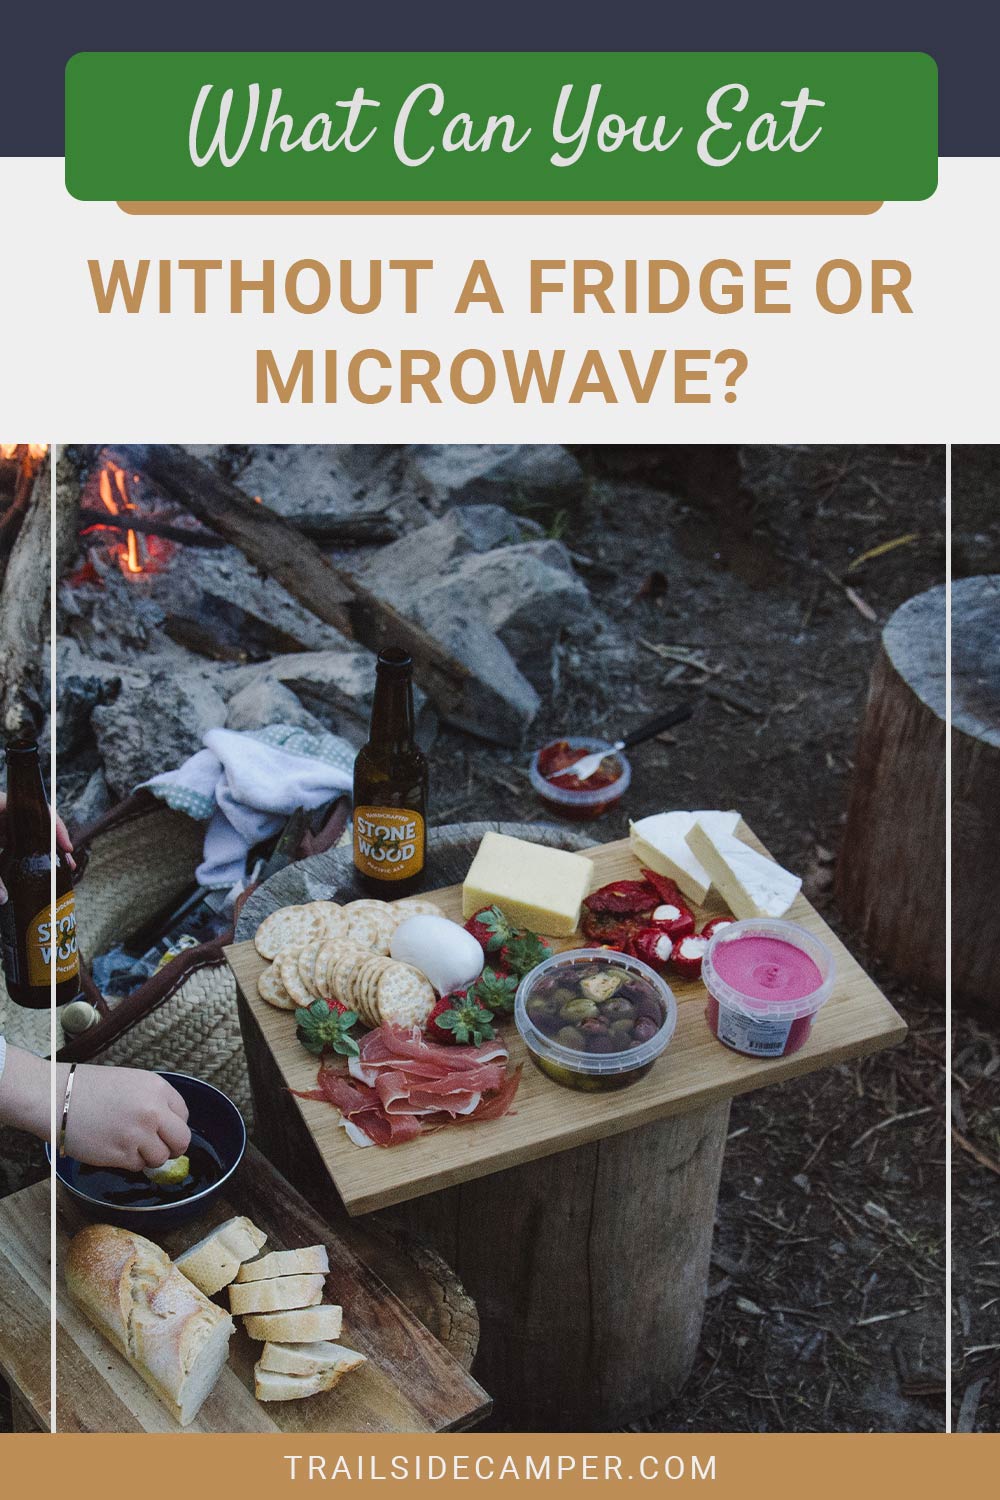 What Can You Eat Without a Fridge or Microwave?